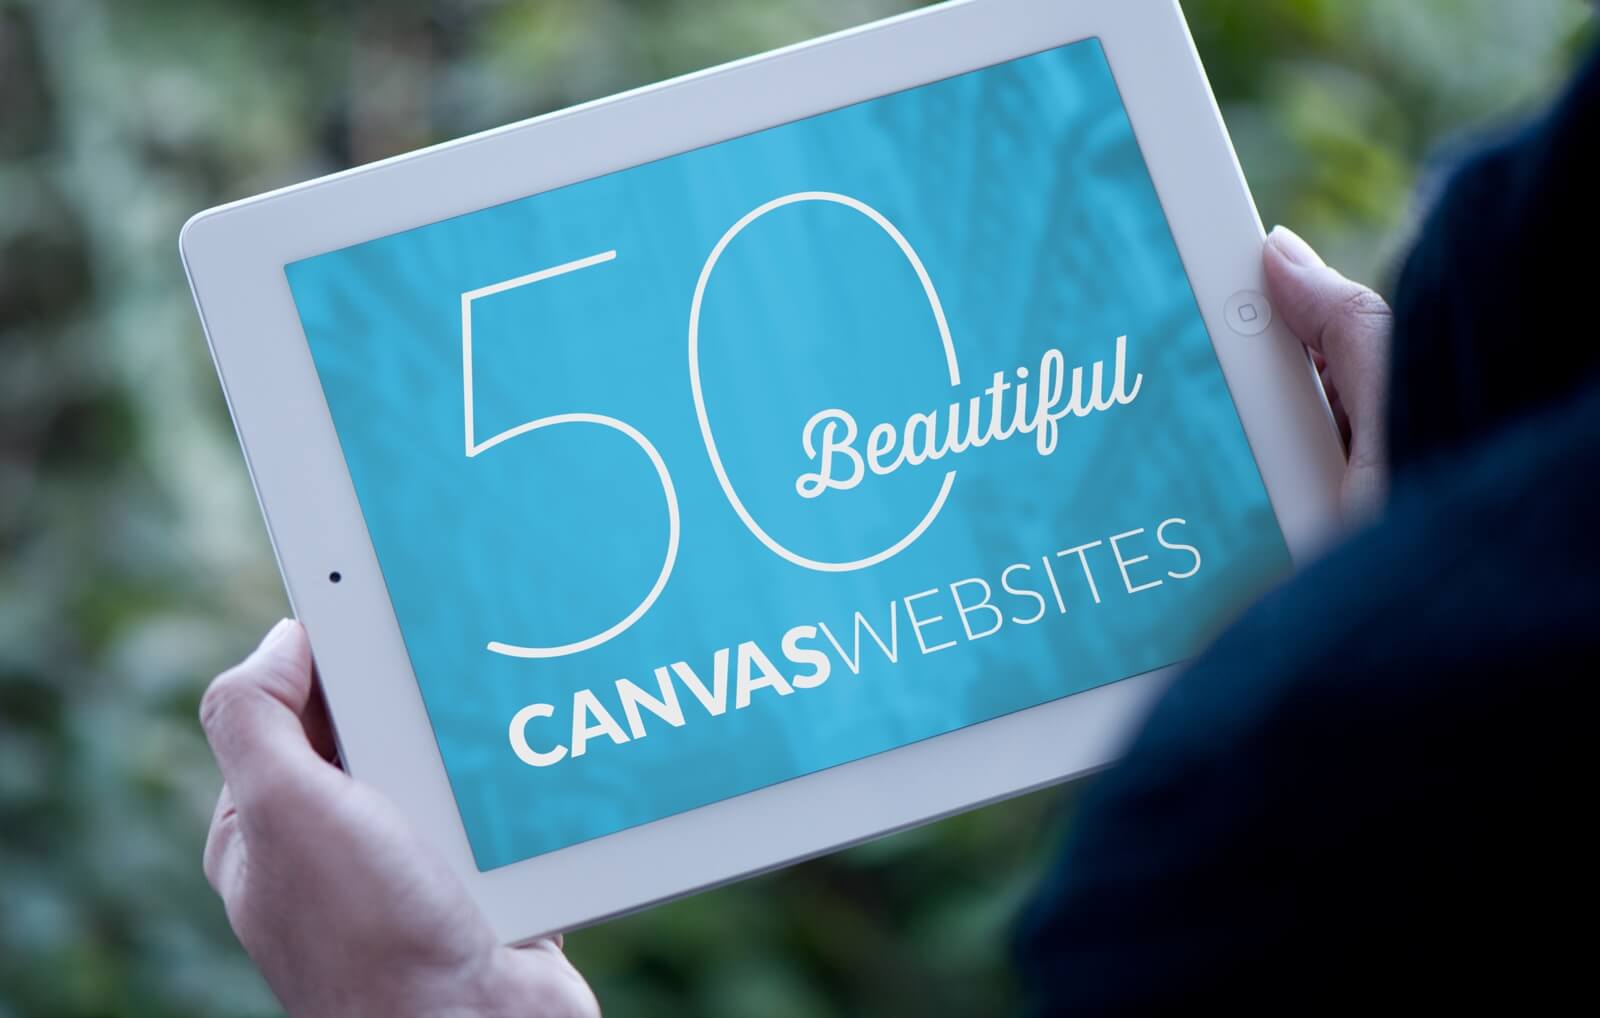 50 Beautiful WooThemes Canvas websites [free ebook] now available